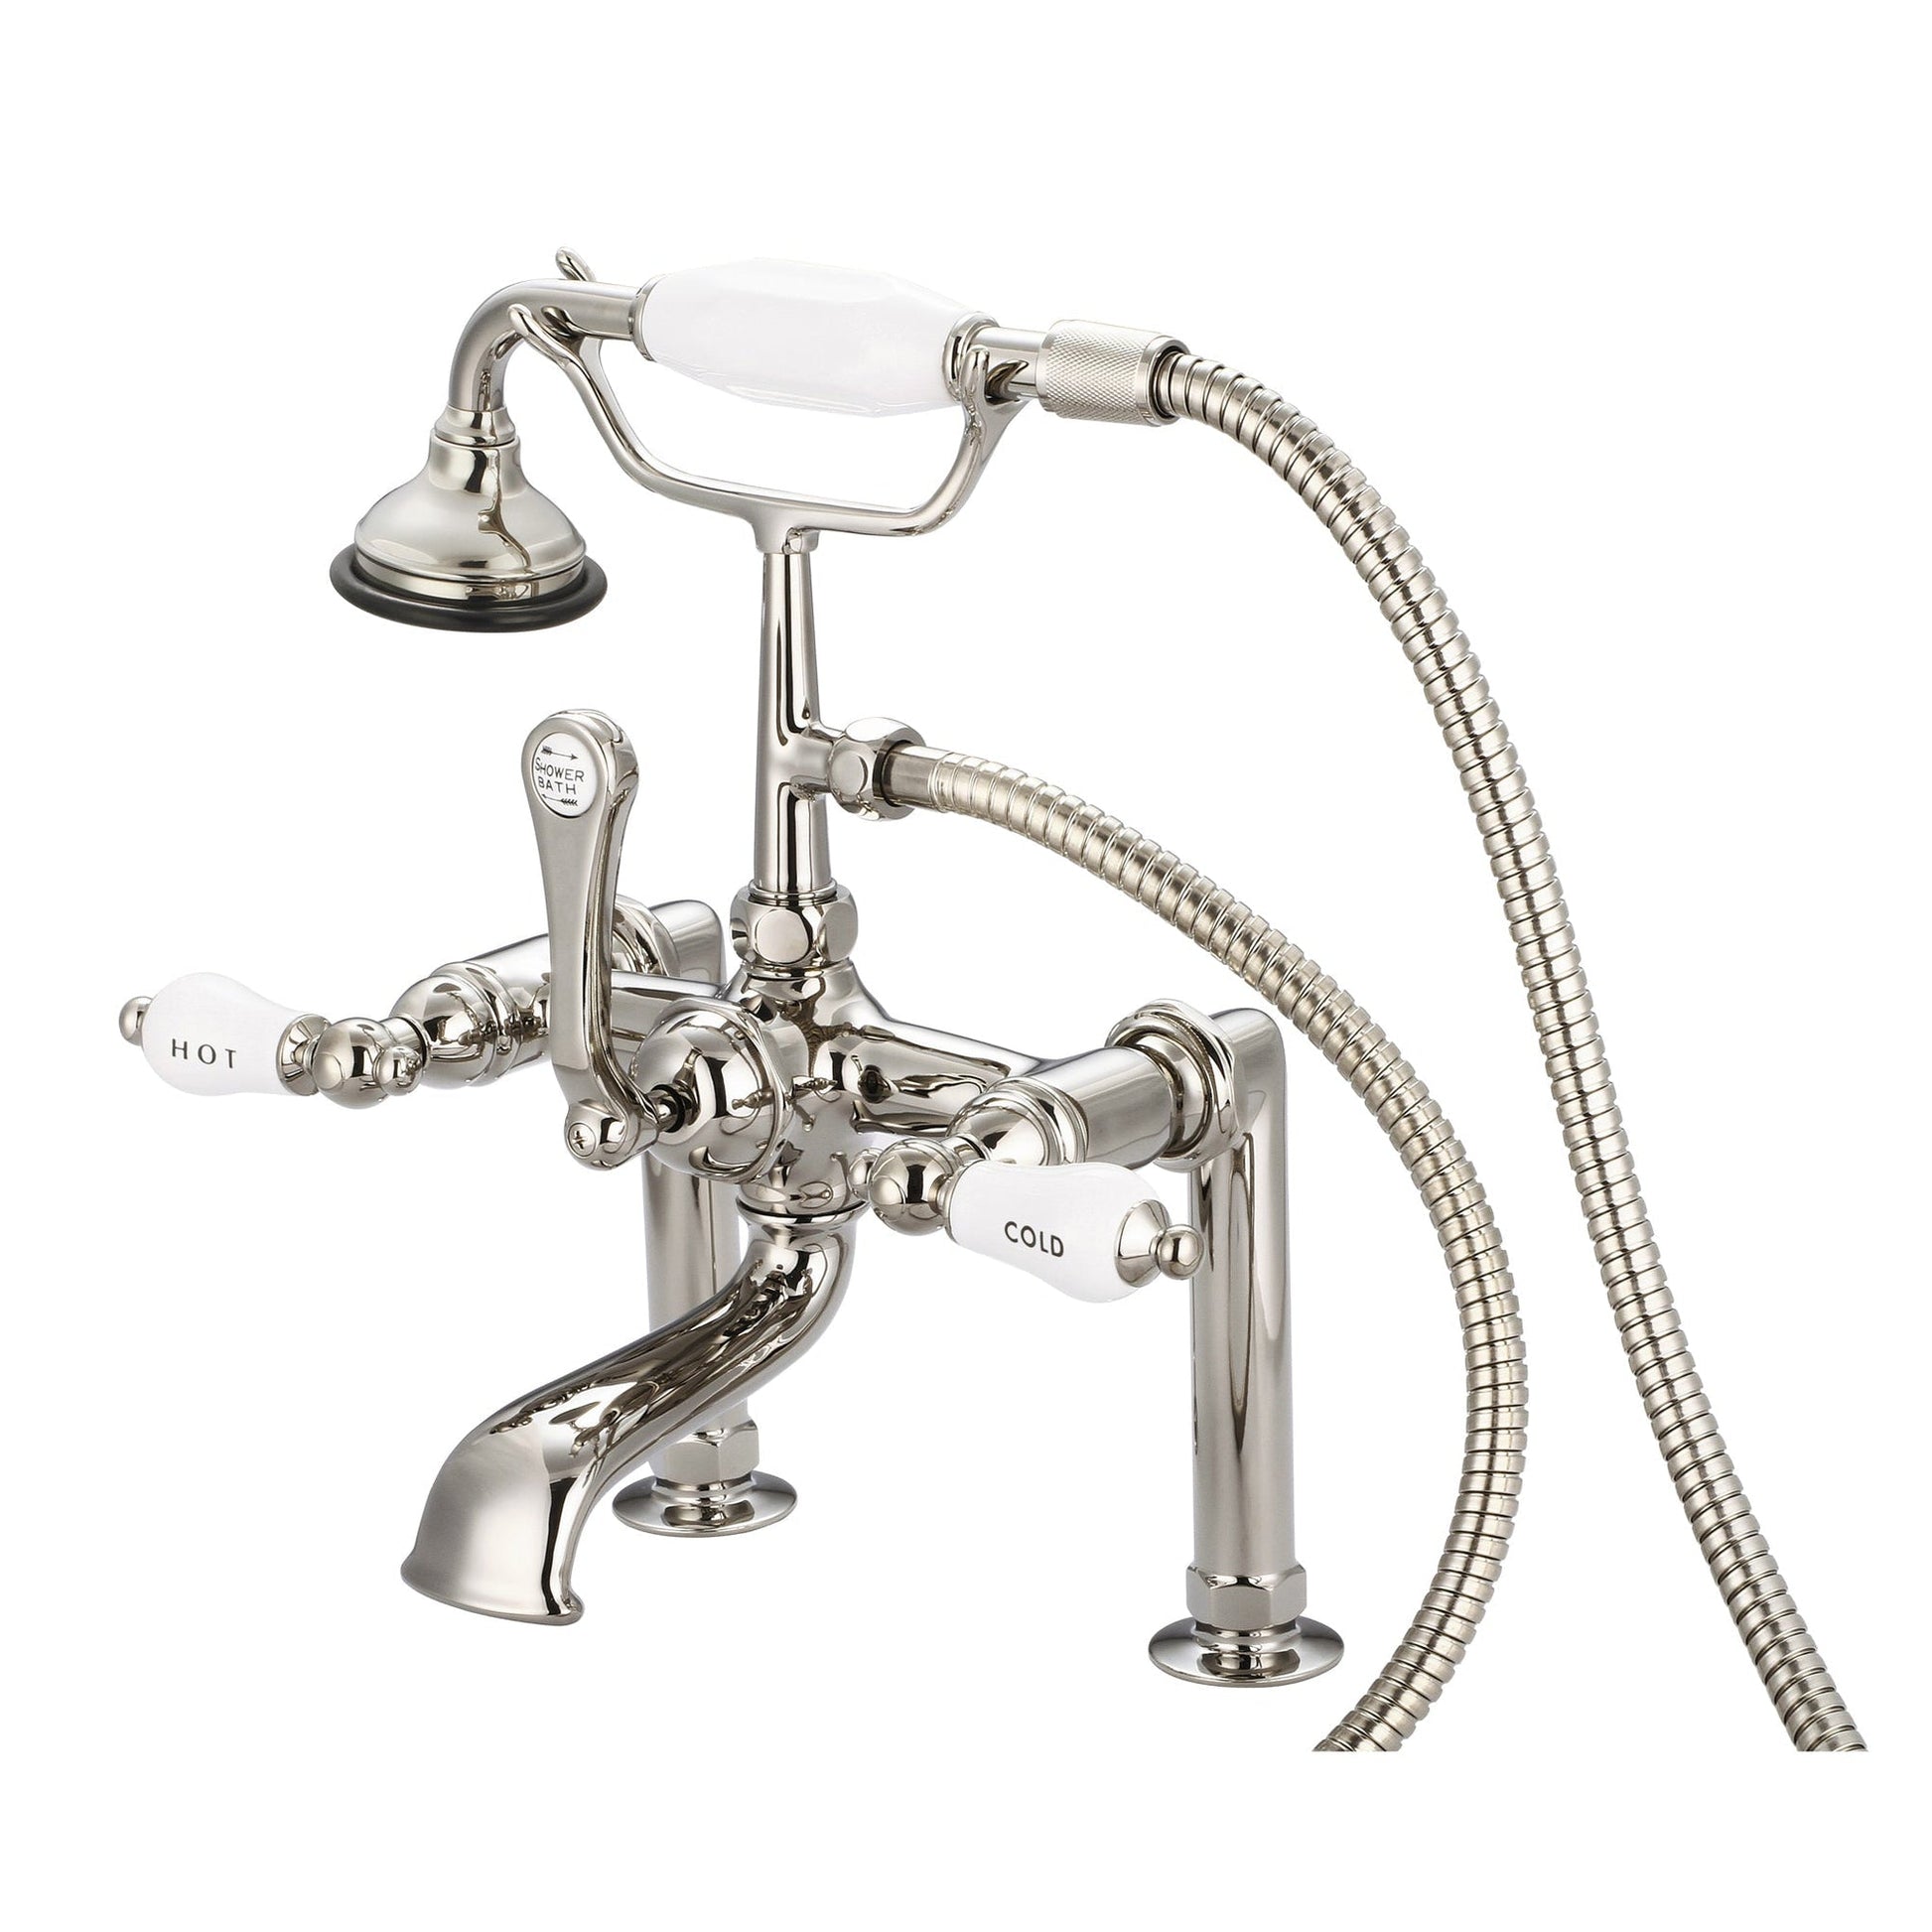 Water Creation Vintage Classic Spread Deck Mount Tub F6-0006 7" Ivory Solid Brass Faucet With 6-Inch Risers And Handheld Shower And Porcelain Lever Handles, Hot And Cold Labels Included